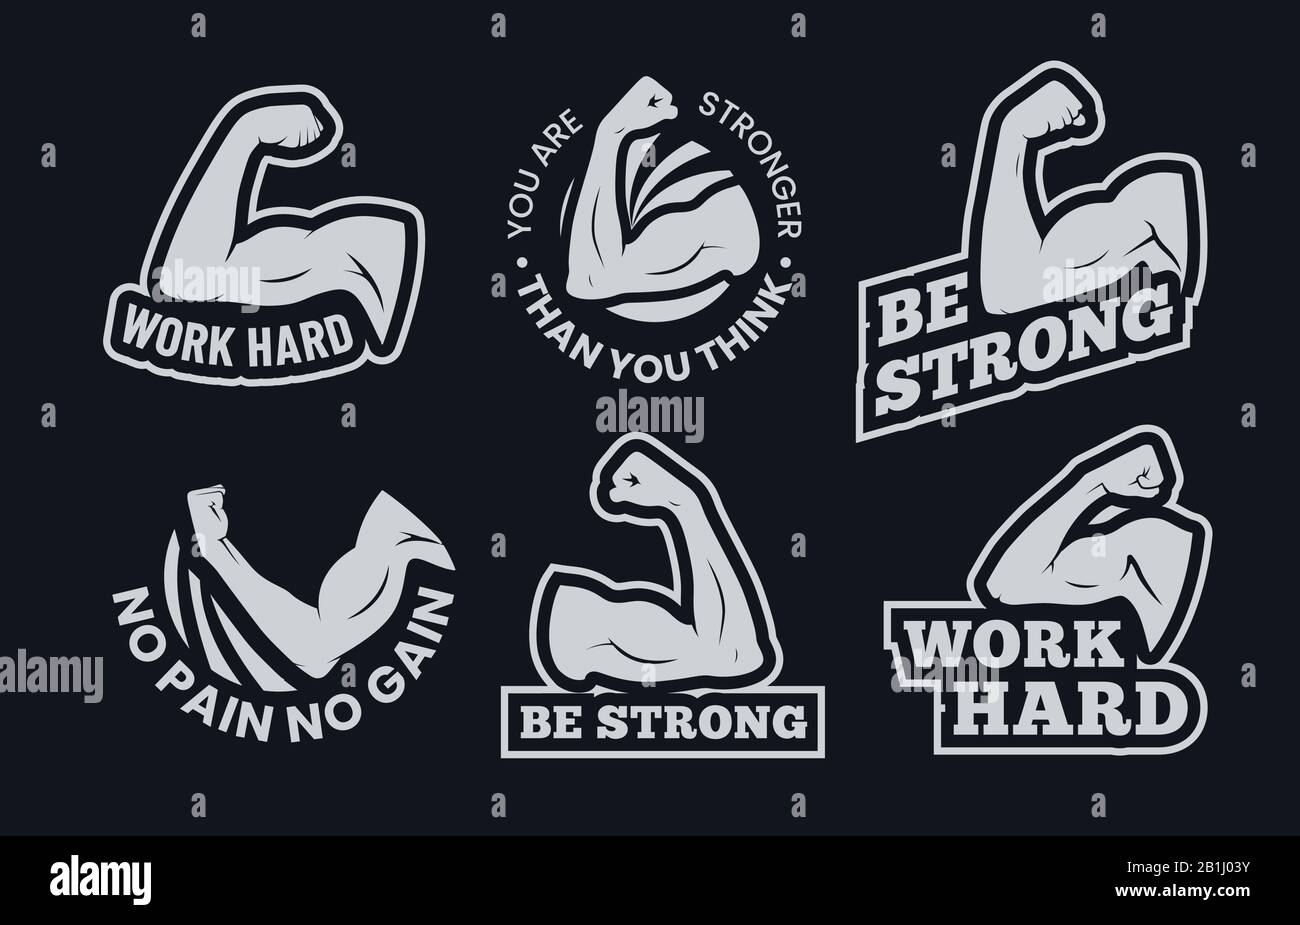 Powerful biceps muscle inspirational quotes. Be strong, work hard arm muscles and power gym. Bodybuilding and fitness signs vector set Stock Vector